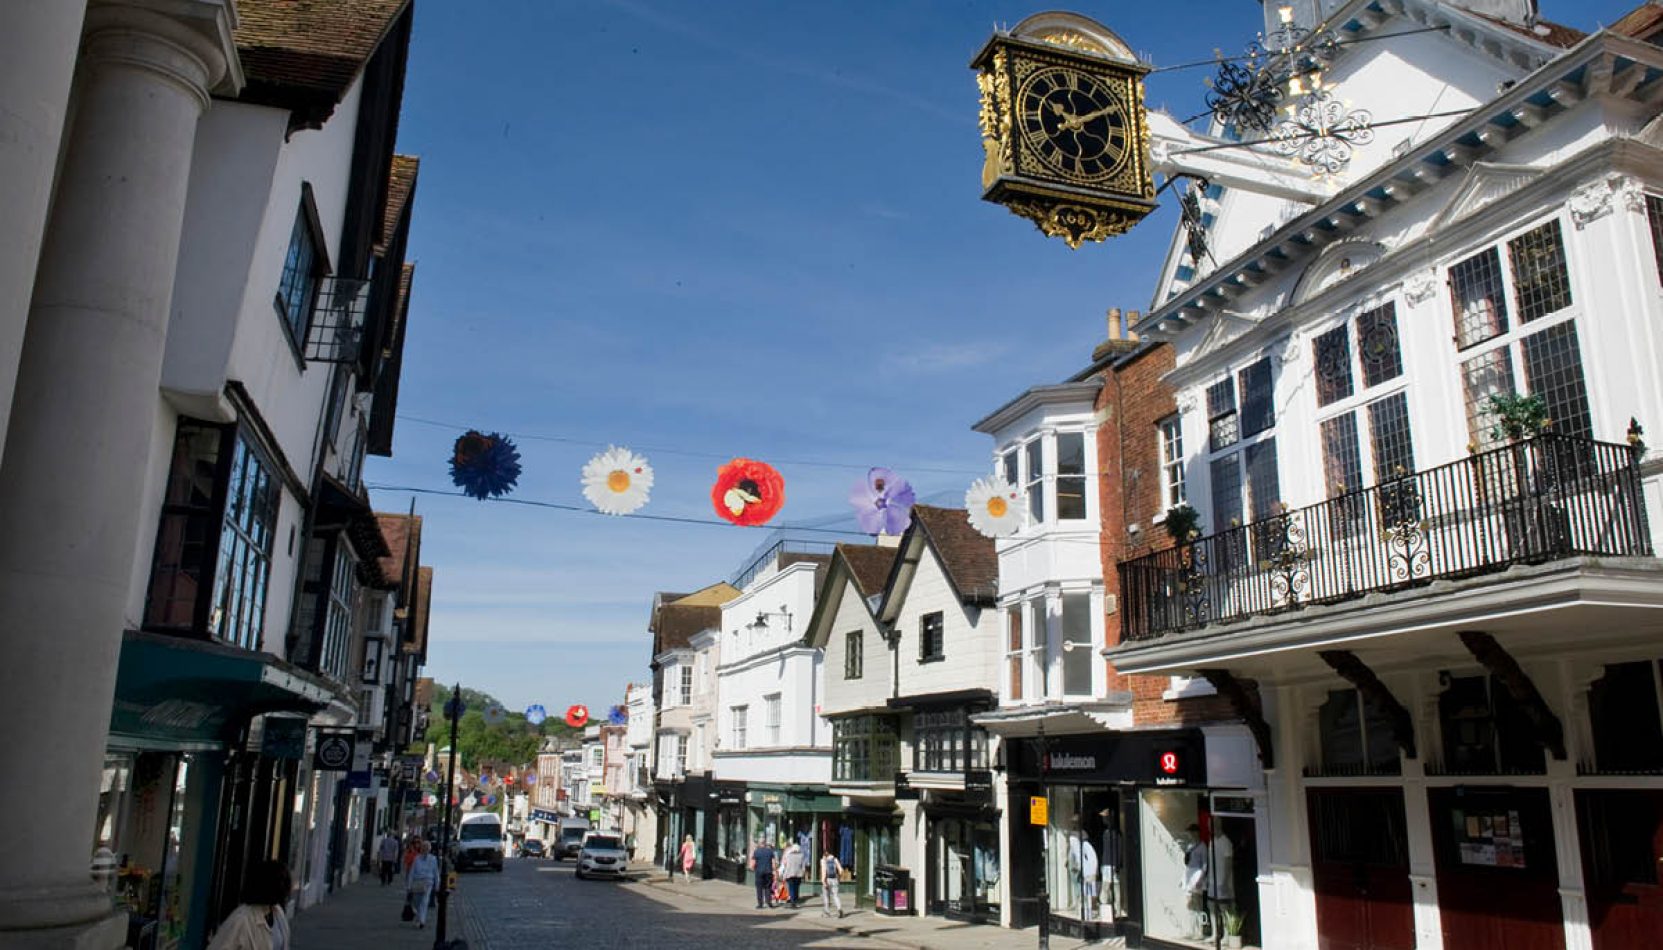 whats on this week, surrey, guide to surrey, events, things to do, guildford high street, platinum jubilee, four day weekend, half term, whats on,